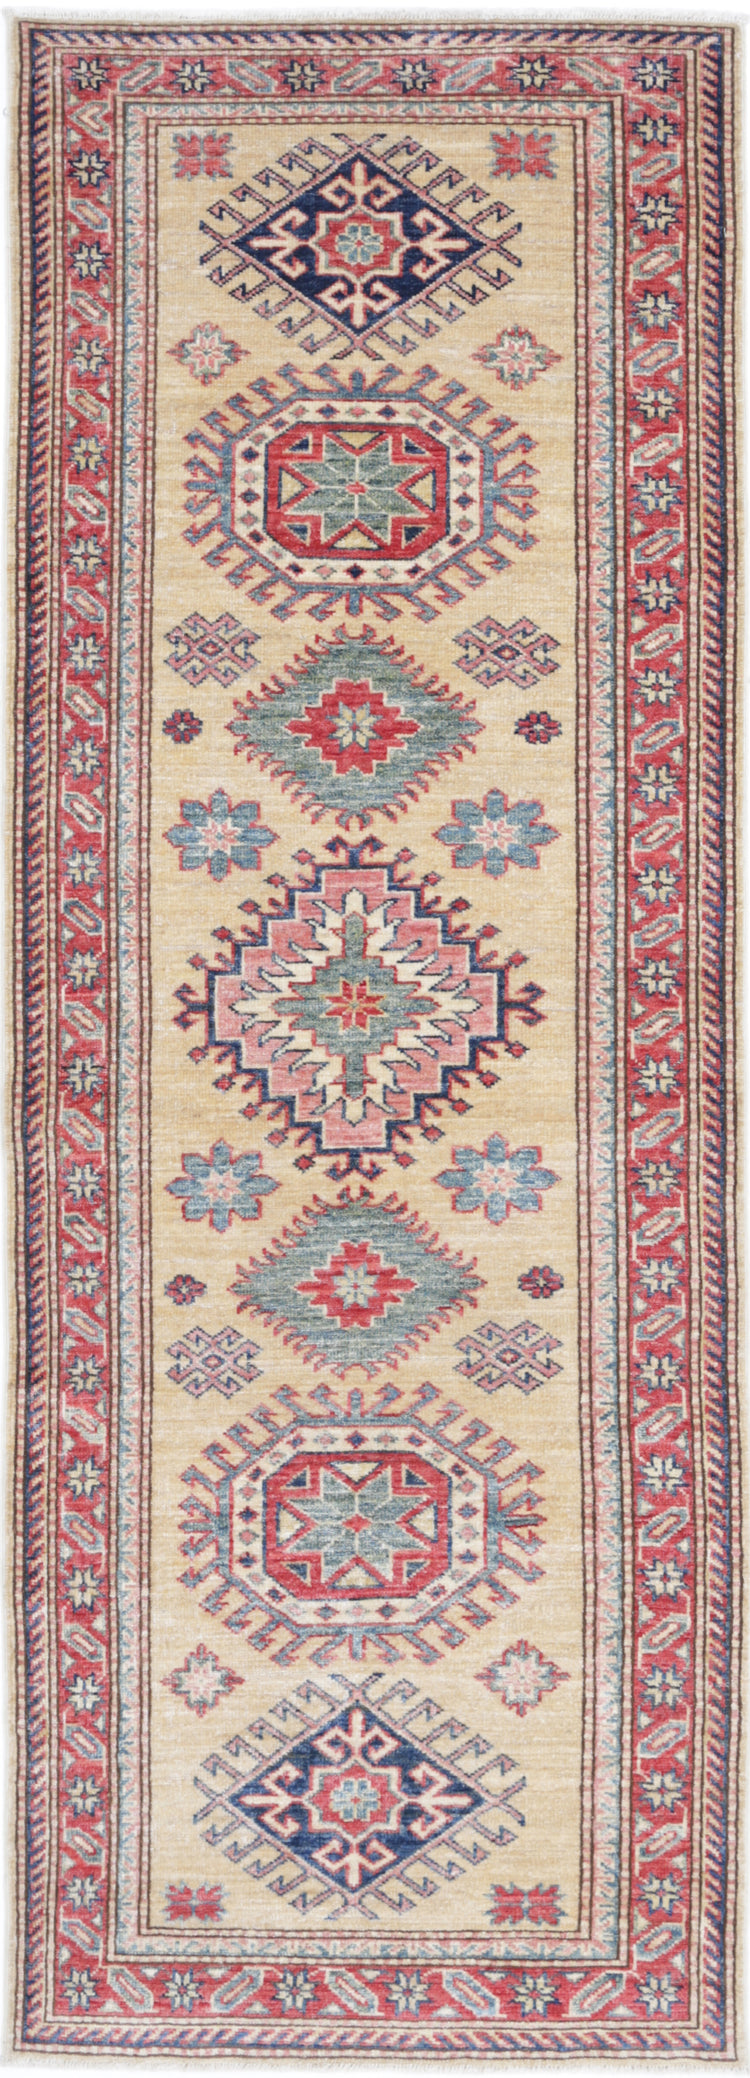 Tribal Hand Knotted Kazak Super Kazak Wool Rug of Size 2'4'' X 6'9'' in Gold and Red Colors - Made in Afghanistan